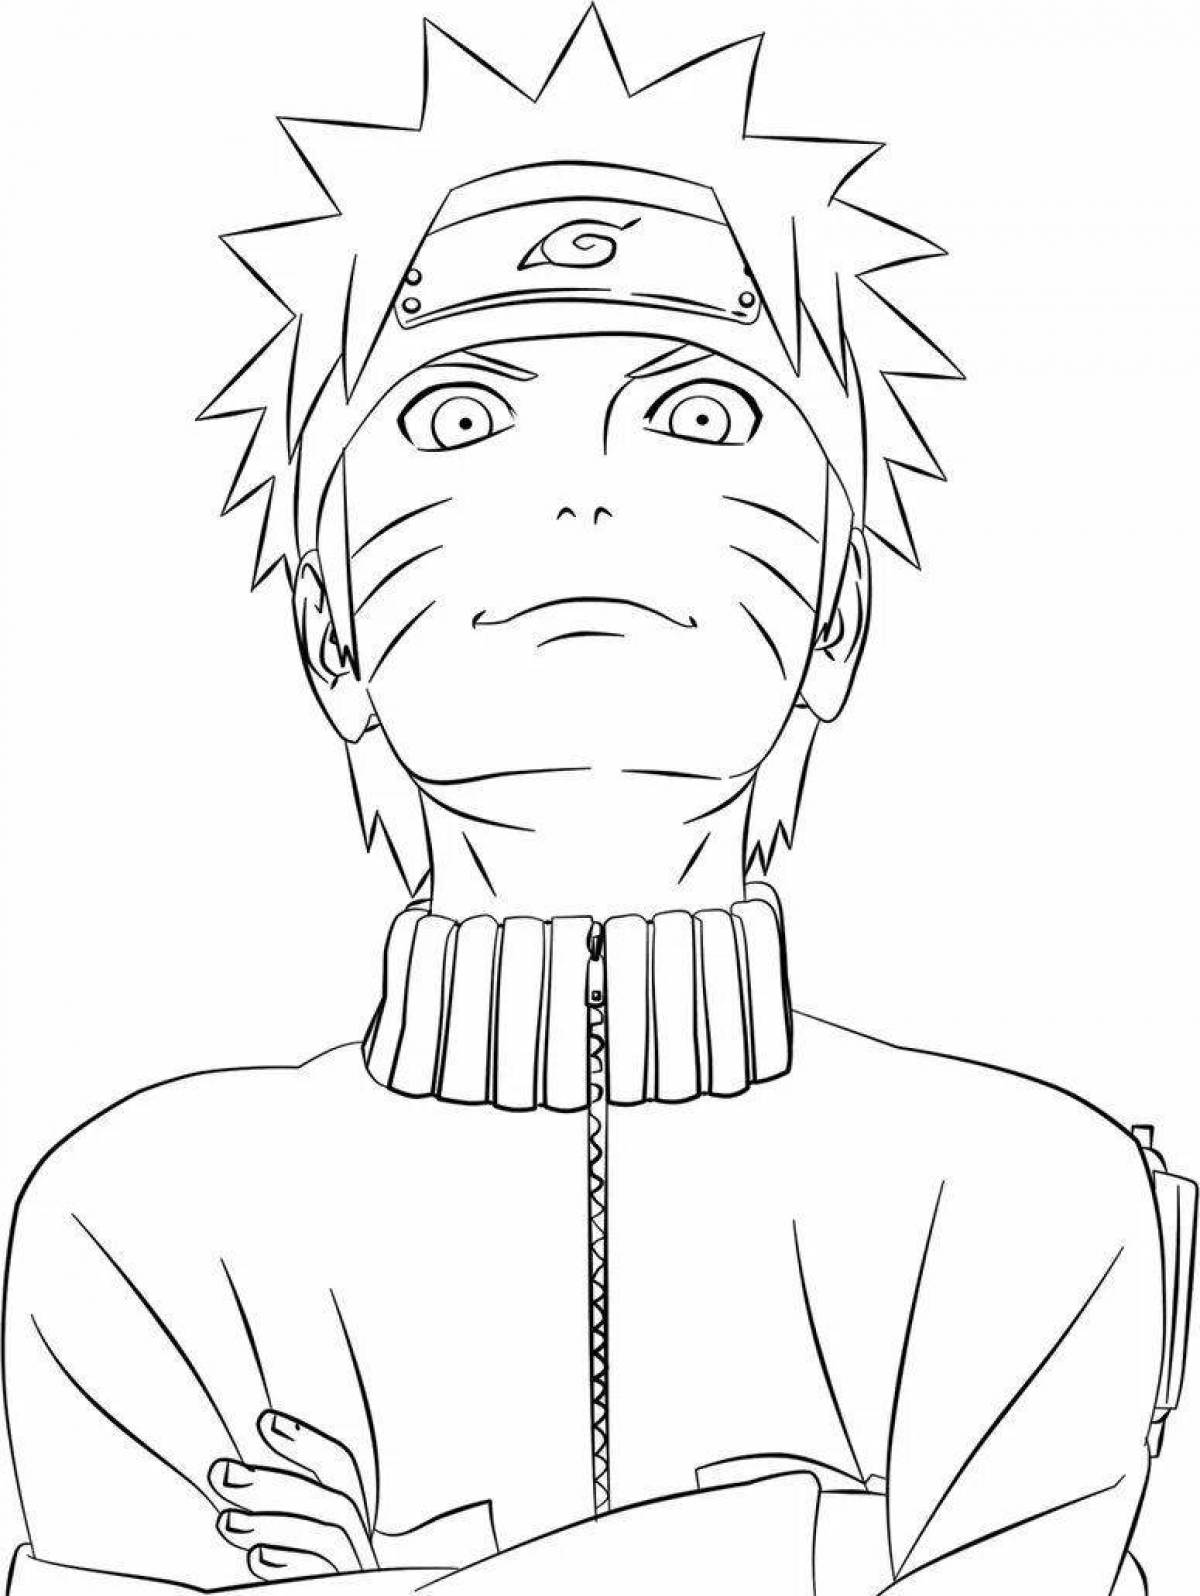 Colorful light naruto coloring page